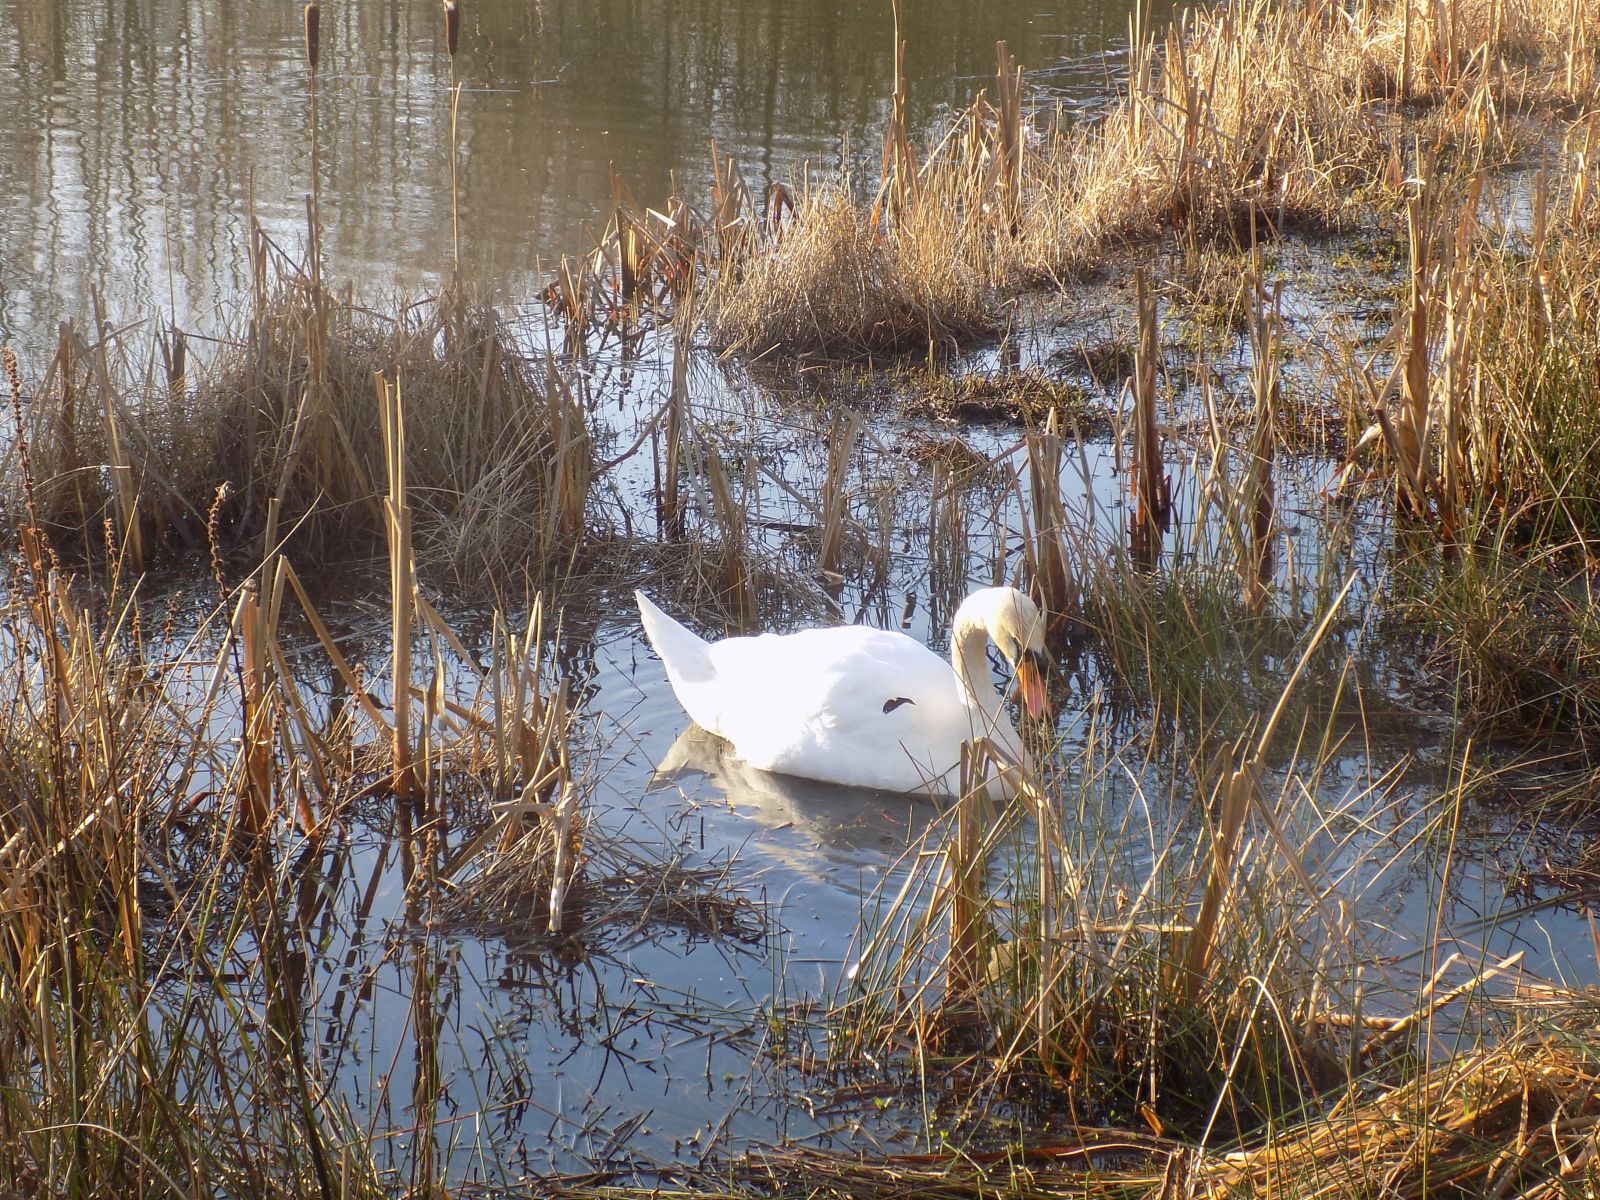 Swan in Pond at Orchardton Woods at Cumbernauld